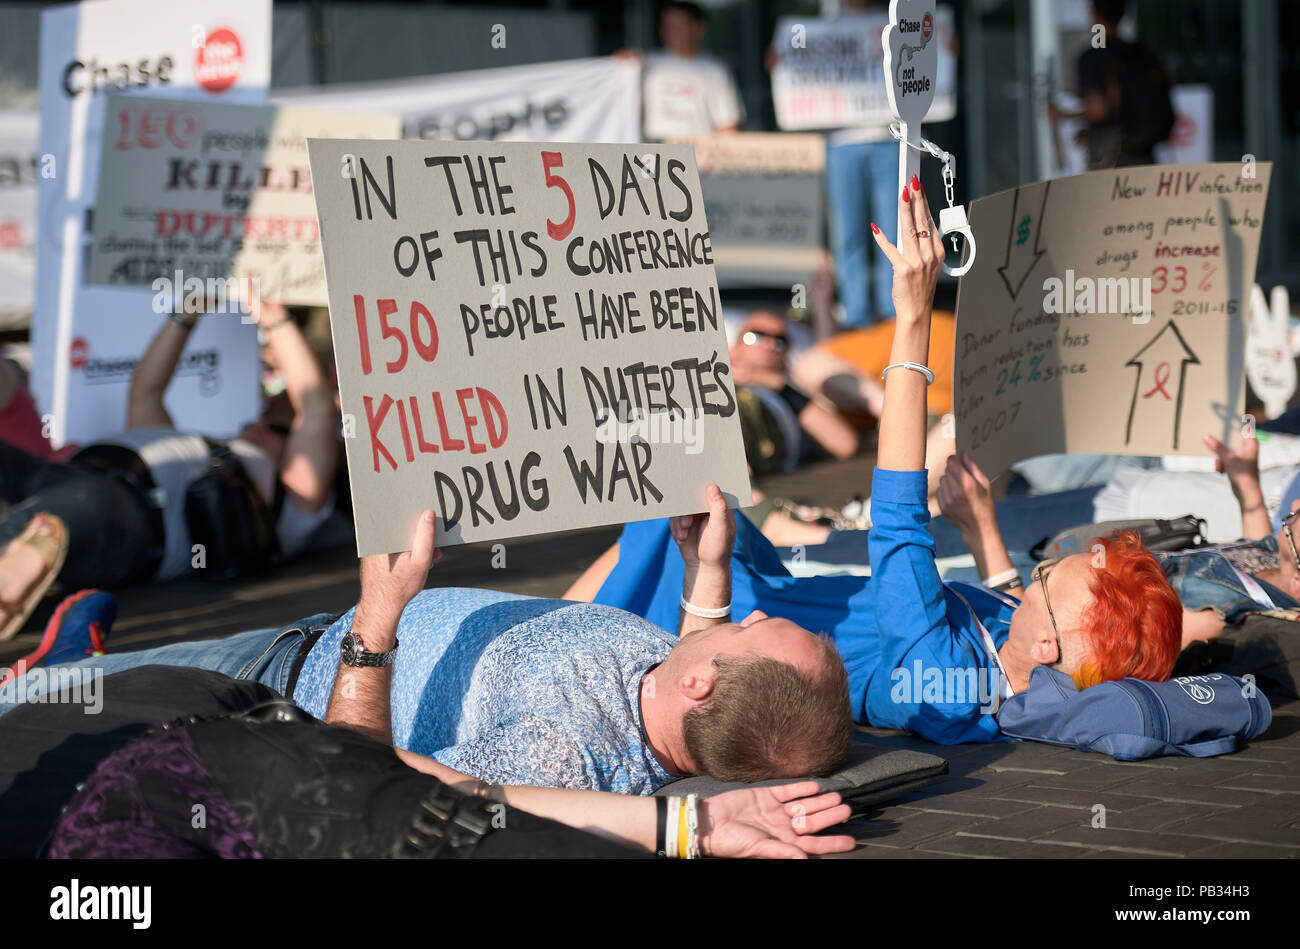 Amsterdam, Netherlands, July 26 2018: During a July 26 demonstration at the entrance to the 2018 International AIDS Conference in Amsterdam, Netherlands, a man holds a sign criticizing the war on drug users being conducted by Philippines President Rodrigo Duterte. Credit: Paul Jeffrey/Alamy Live News Stock Photo